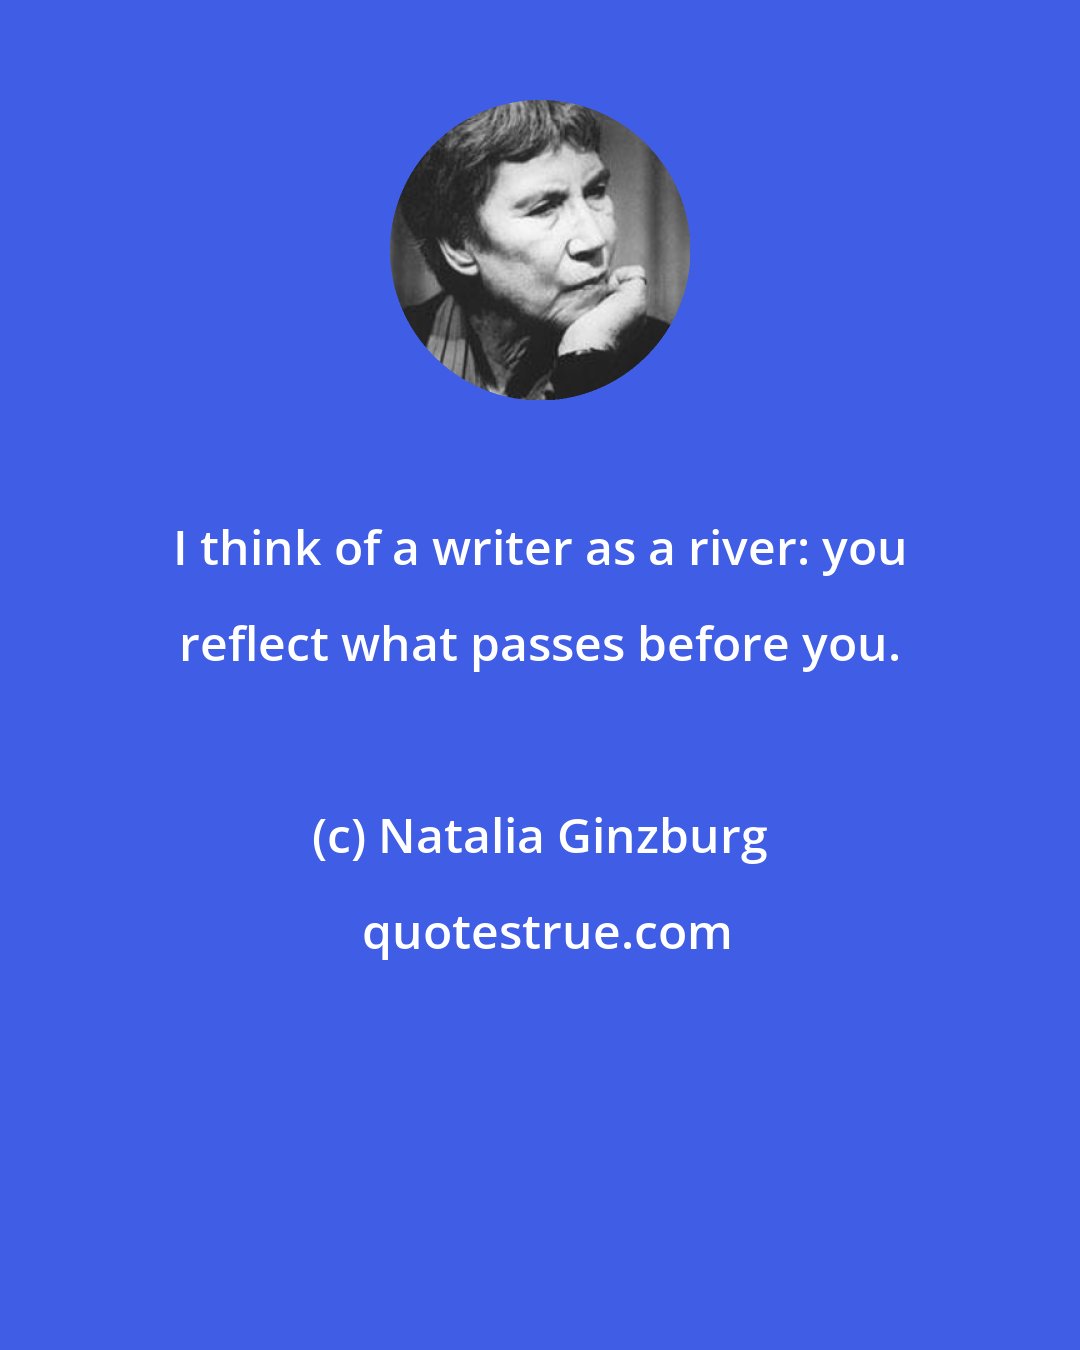 Natalia Ginzburg: I think of a writer as a river: you reflect what passes before you.